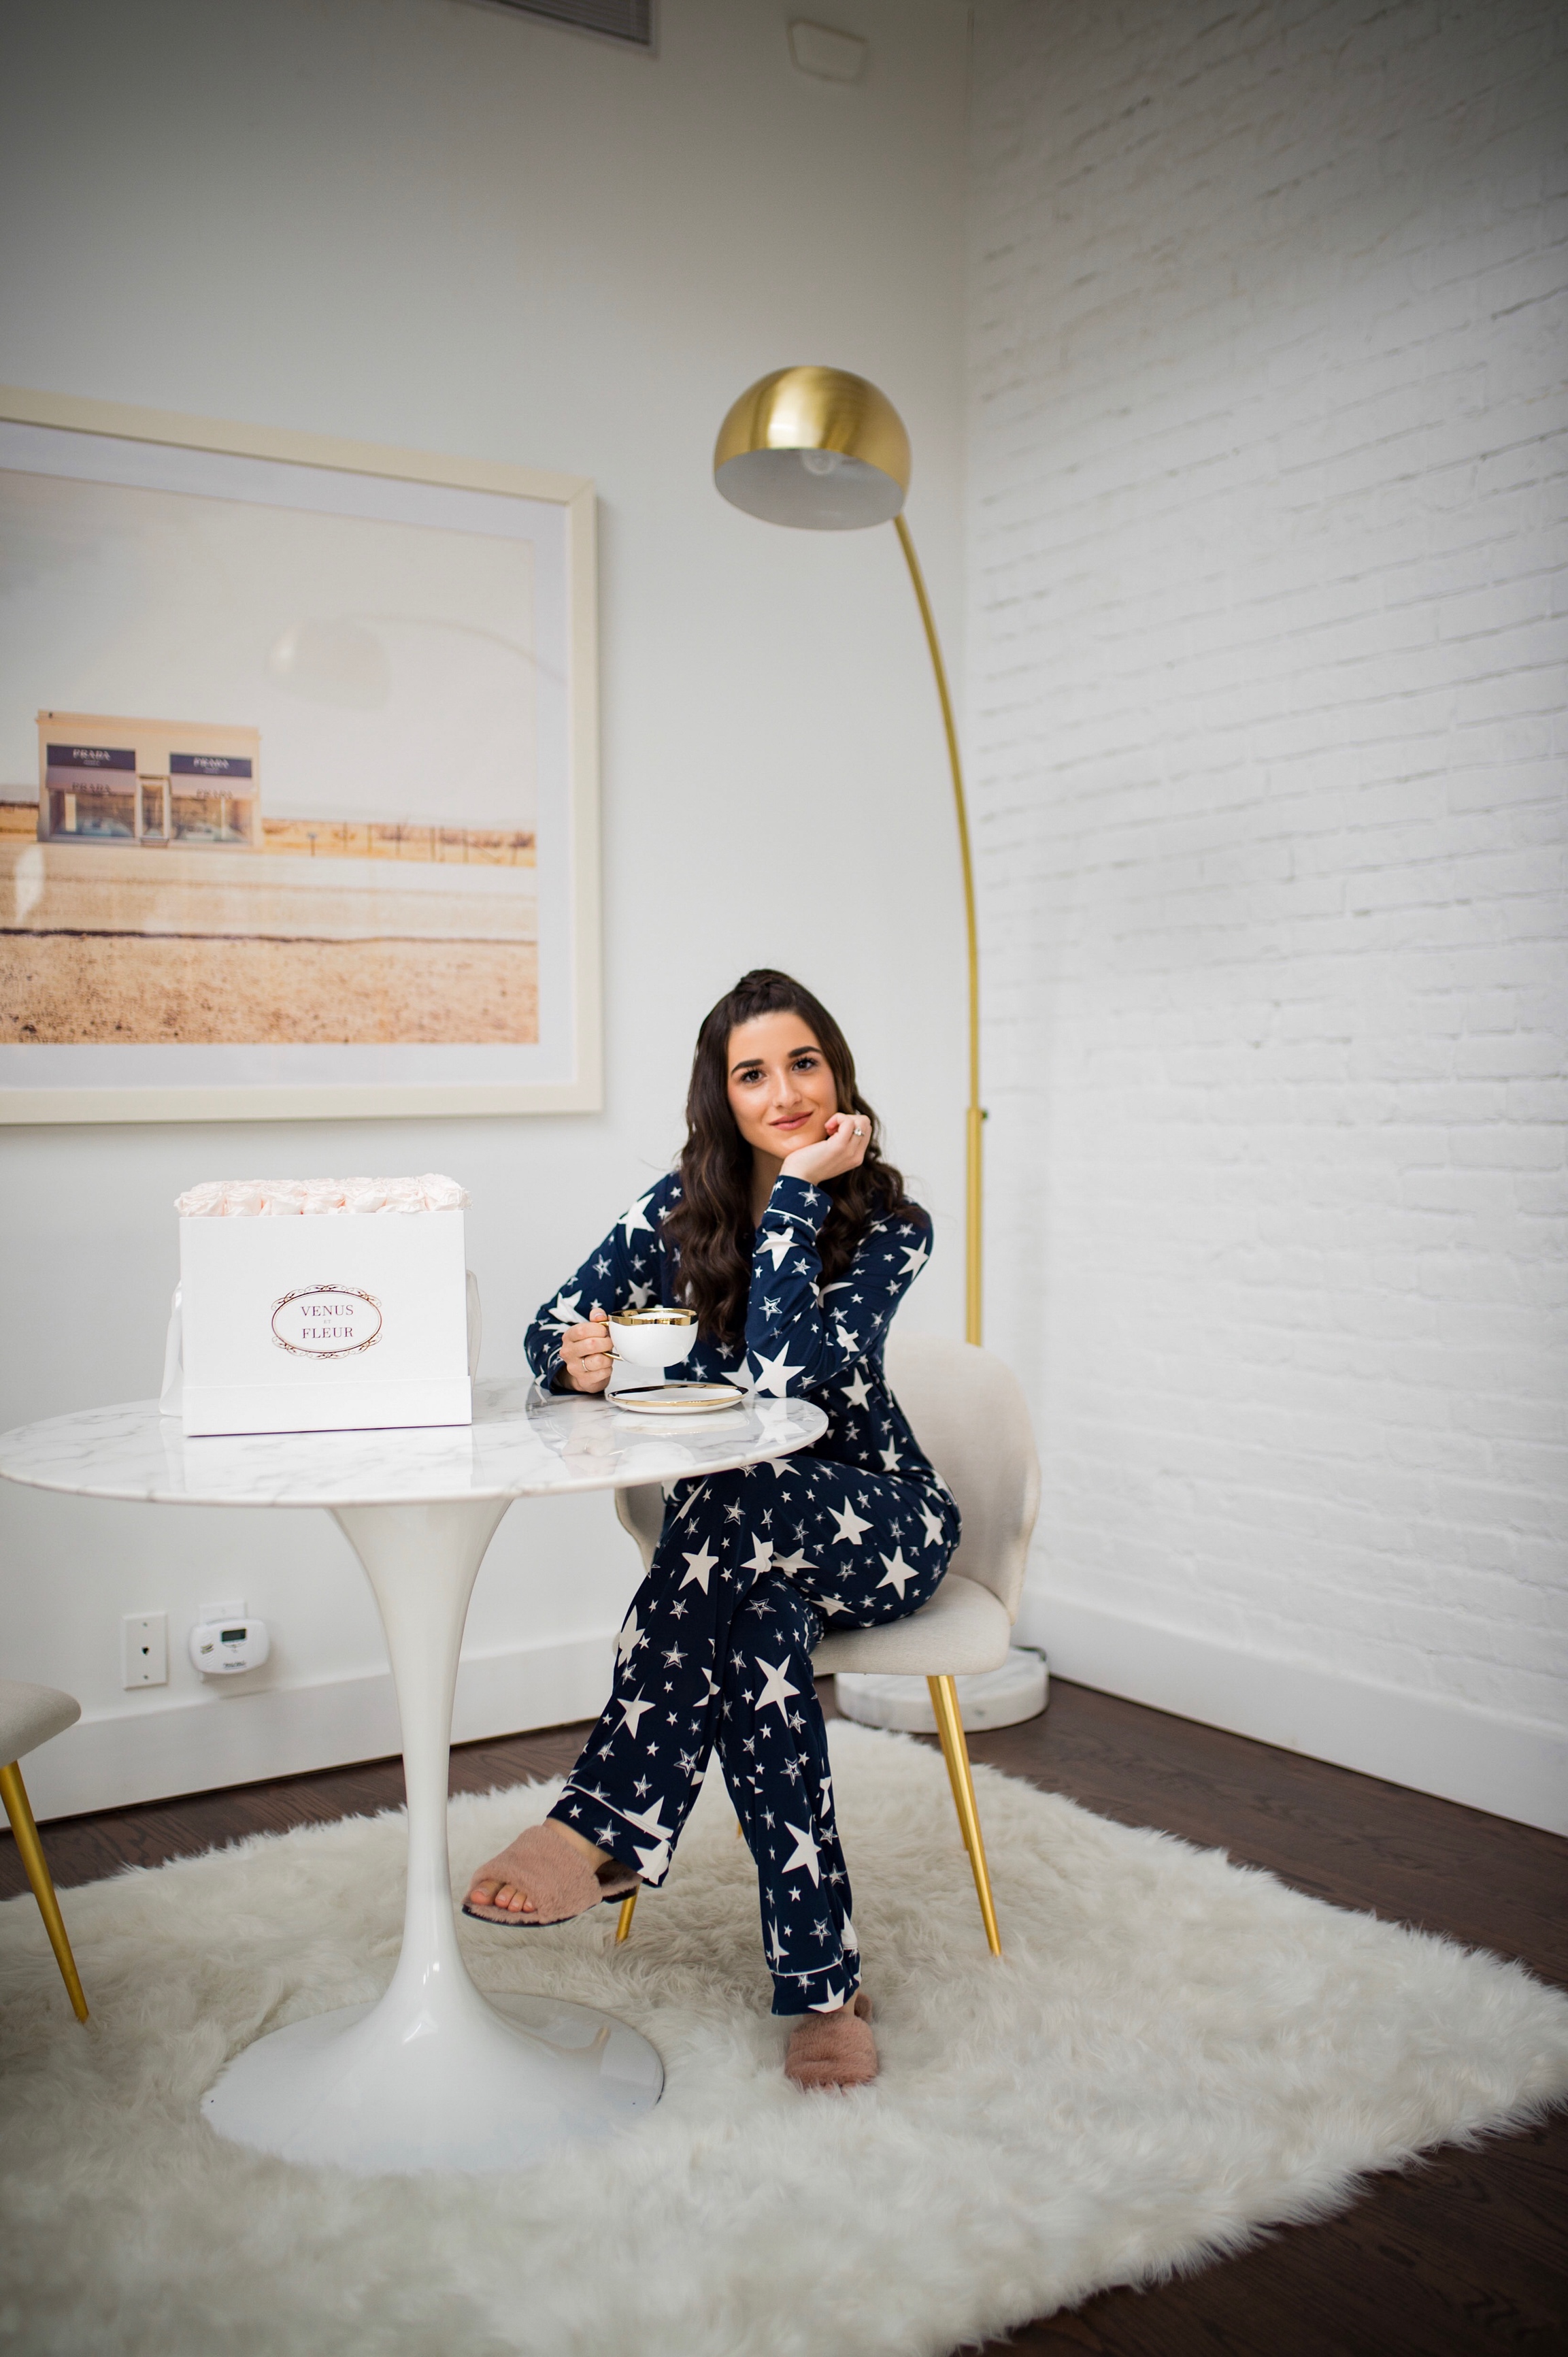 5 Tips For Becoming A Morning Person Navy Star Pajamas Esther Santer Fashion Blog NYC Street Style Blogger Outfit OOTD Trendy Shopping PJs Holiday ASOS Cute Wear Interior Beautiful Home Penthouse Wayfair Circle Mirror Venus Et Fleur Gold Lamp Marble.jpg